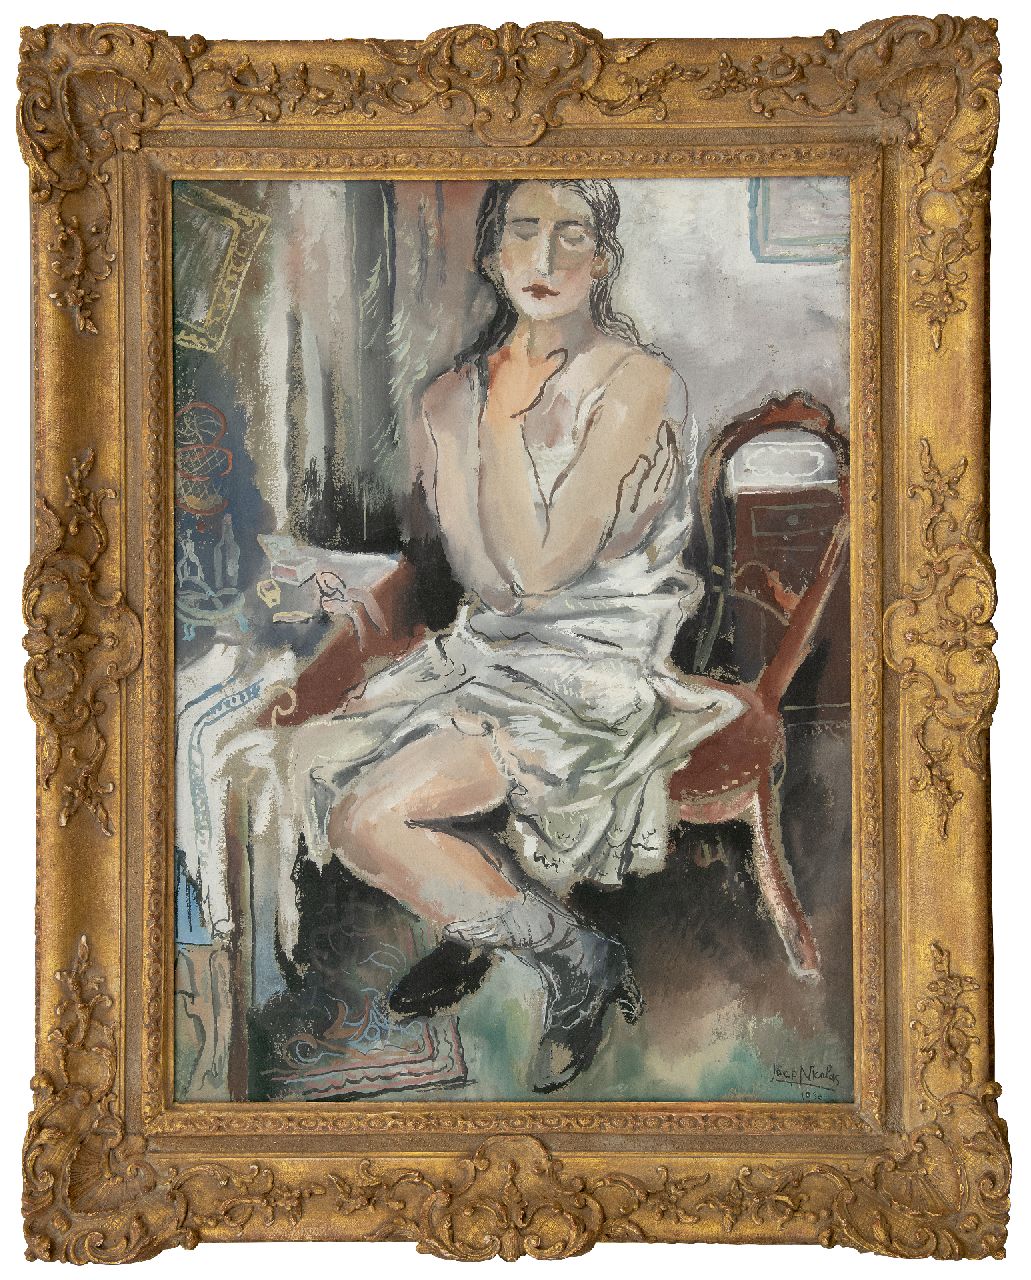 Nicolas J.A.H.F.  | Josephus Antonius Hubertus Franciscus 'Joep' Nicolas | Watercolours and drawings offered for sale | Seated woman, gouache on paper laid down on board 77.5 x 57.3 cm, signed l.r. and dated 1930